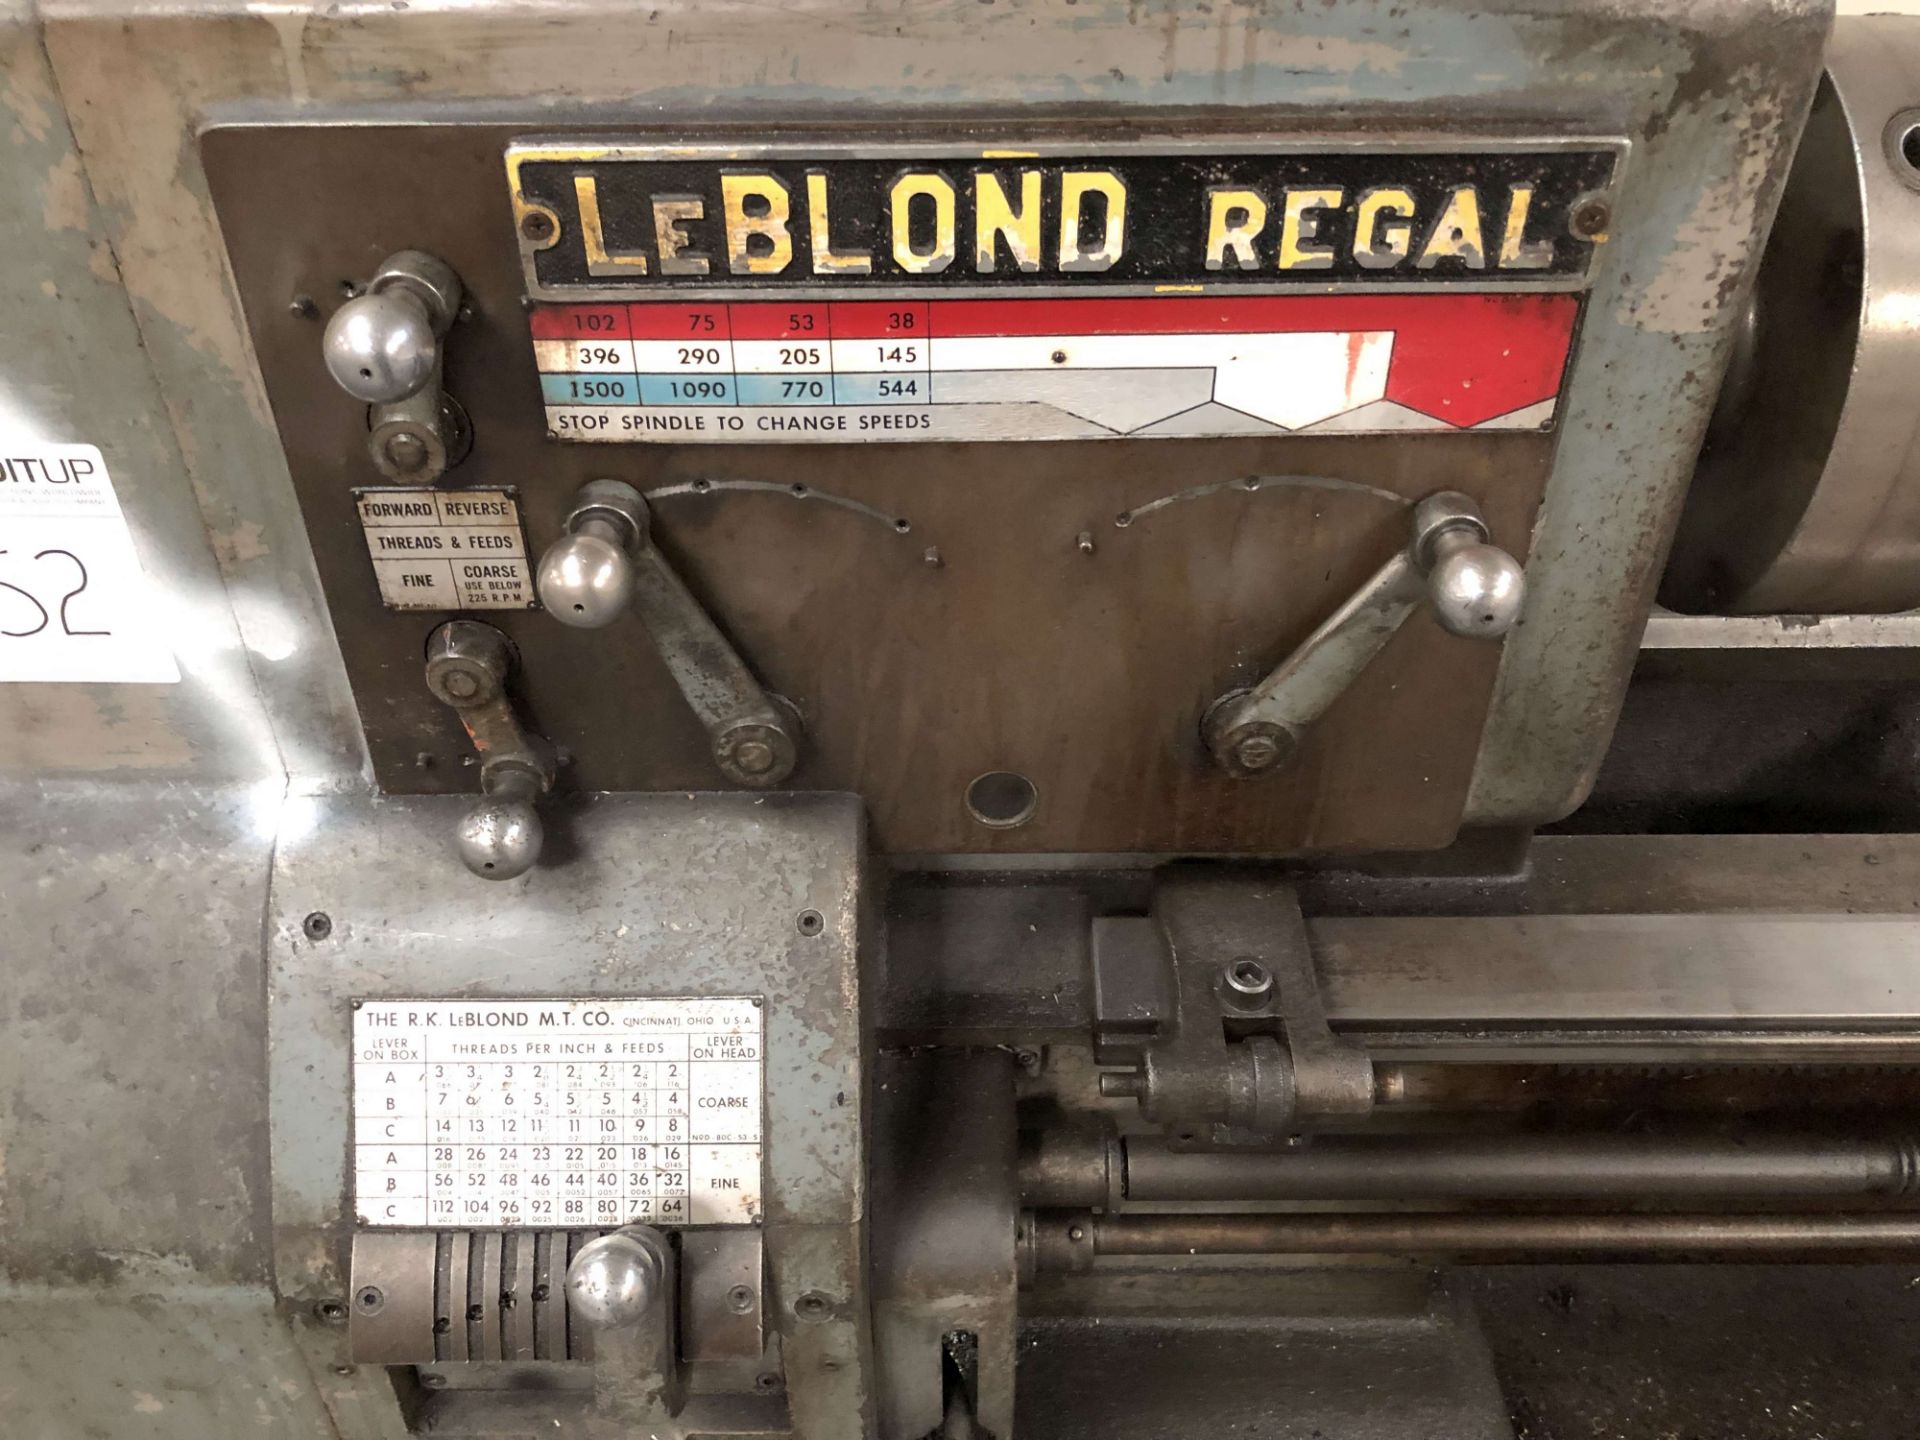 LeBlond Regal 18" x 48" Lathe, 38-1500 RPM, 1-1/2" Spindle Bore, 10" 3-Jaw Chuck, Tailstock, Tool - Image 4 of 4